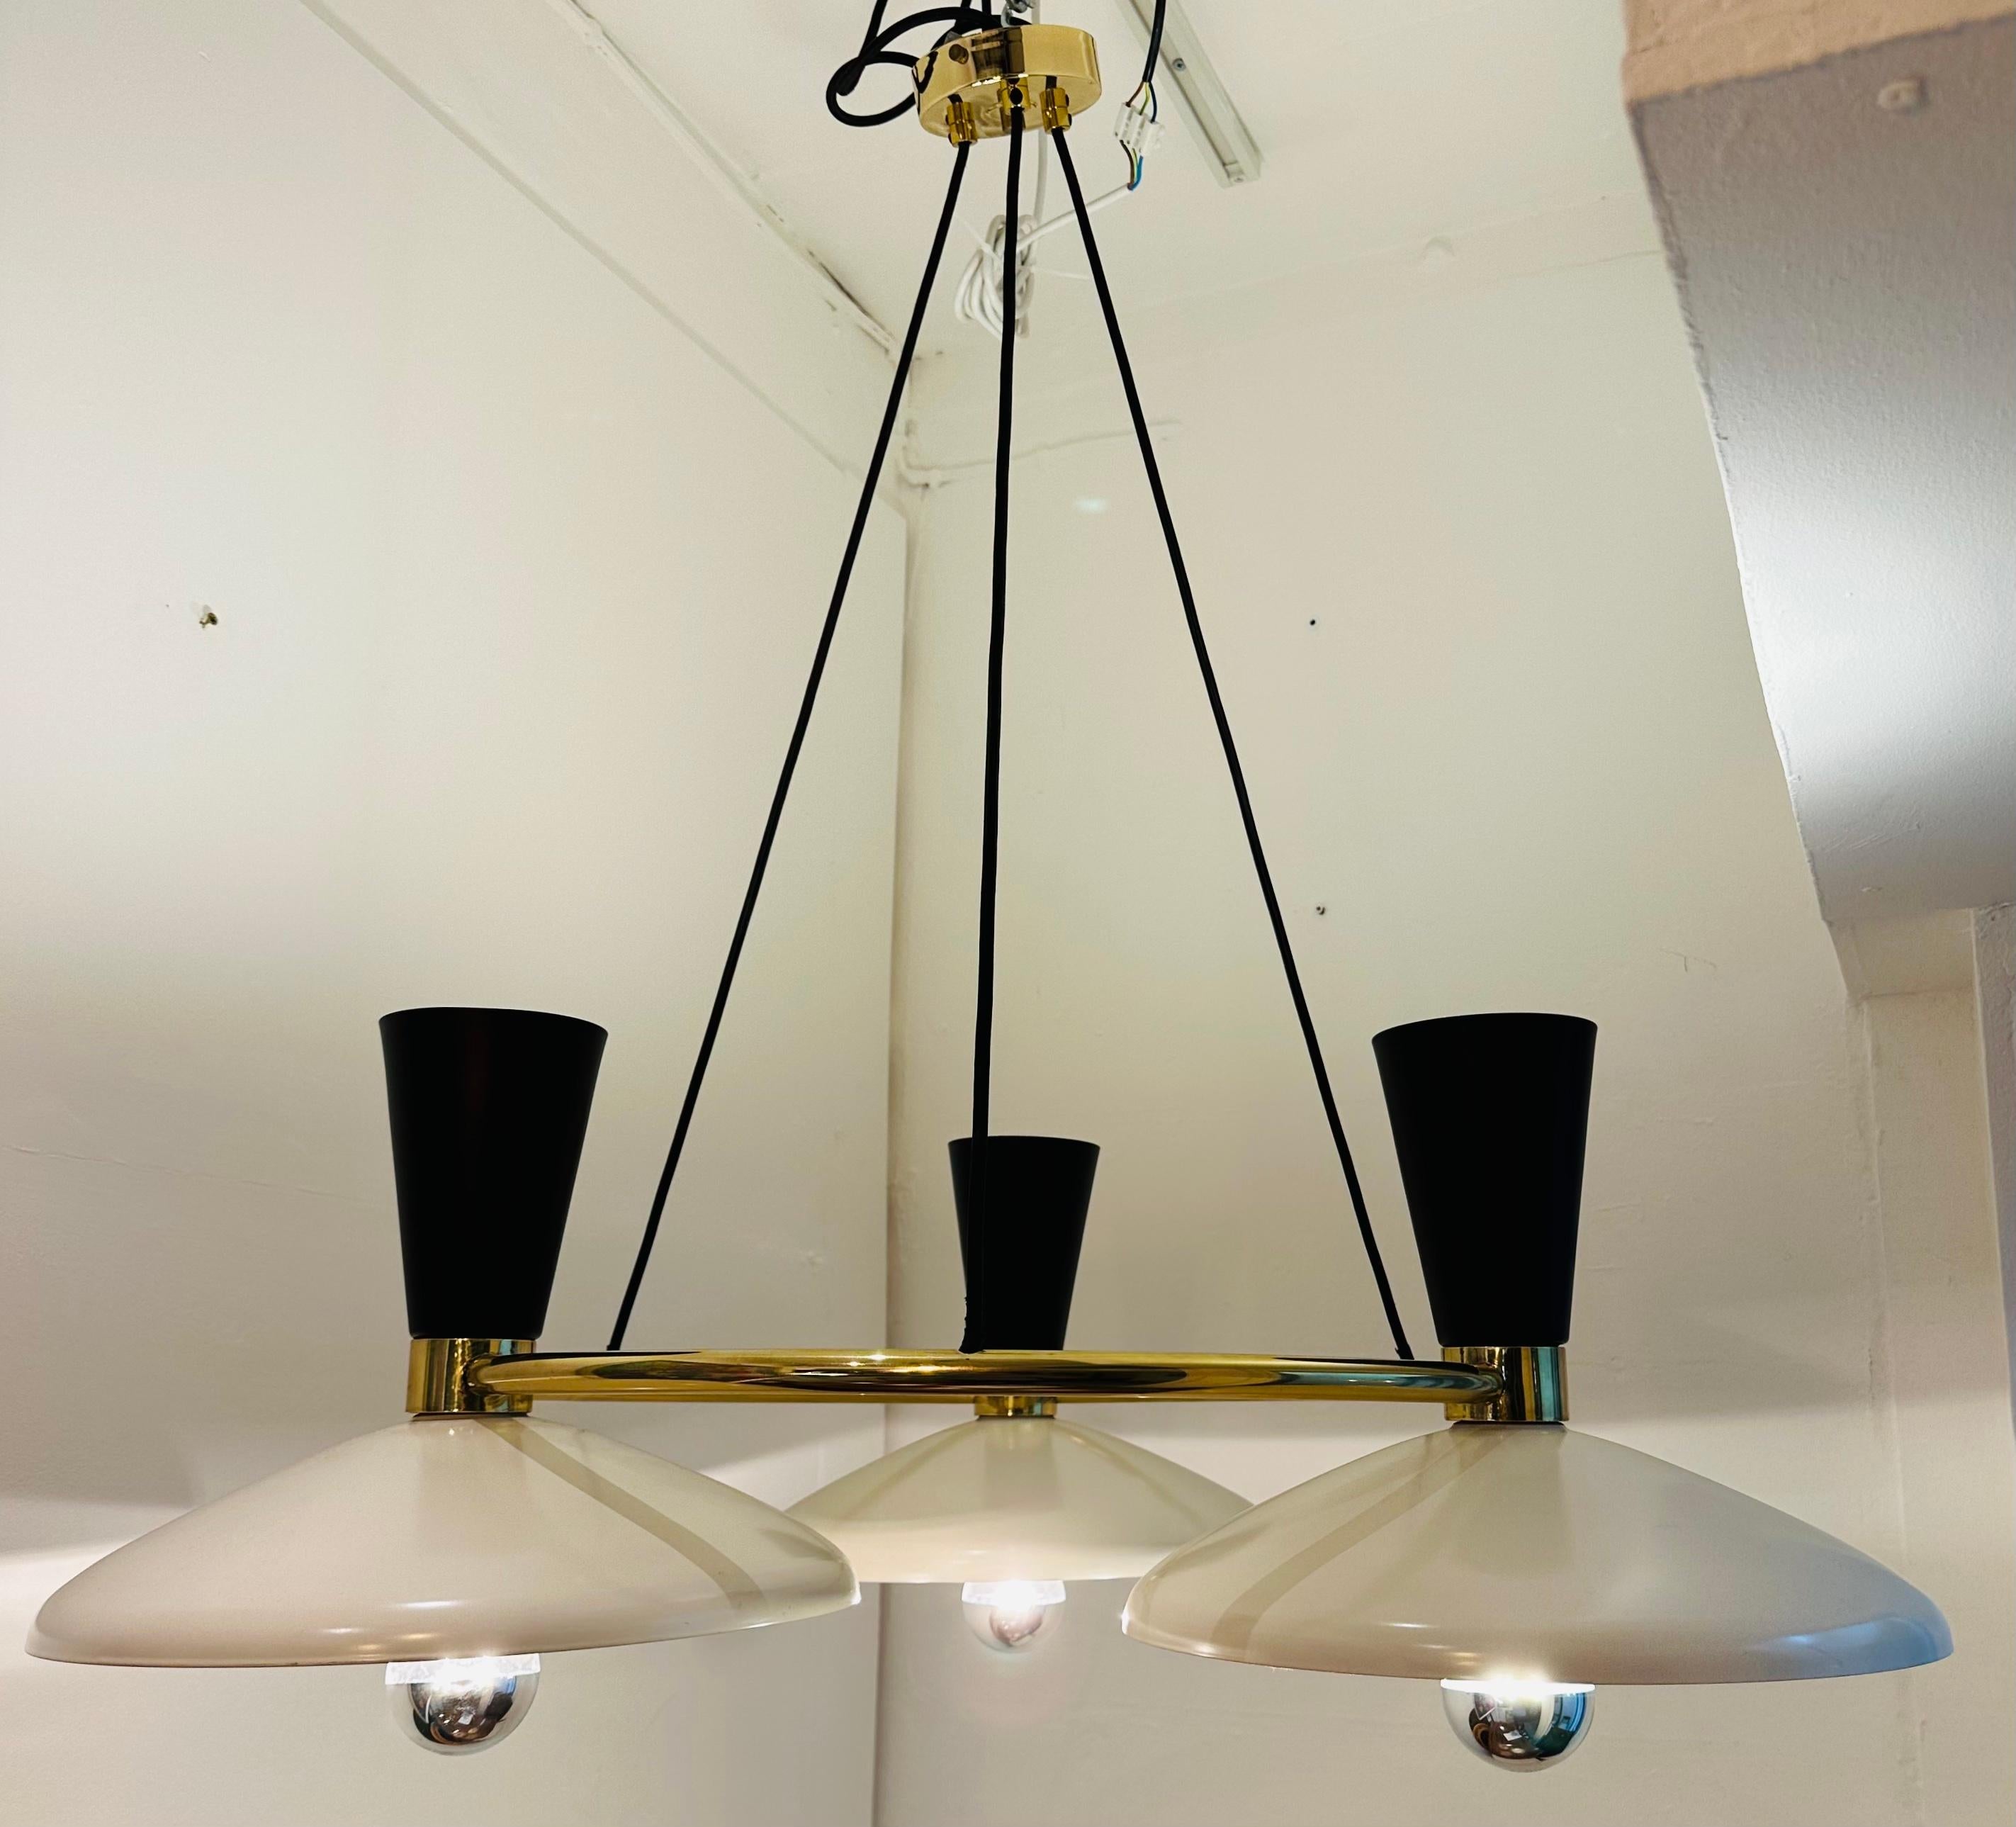 A contemporary 1950s Stilnovo Italian style 3-shade chandelier manufactured in the United Kingdom.  The powder-coated off-white lower wider down-lit shades are complimented with a powder-coated uplighting black shade above.  The shades are supported